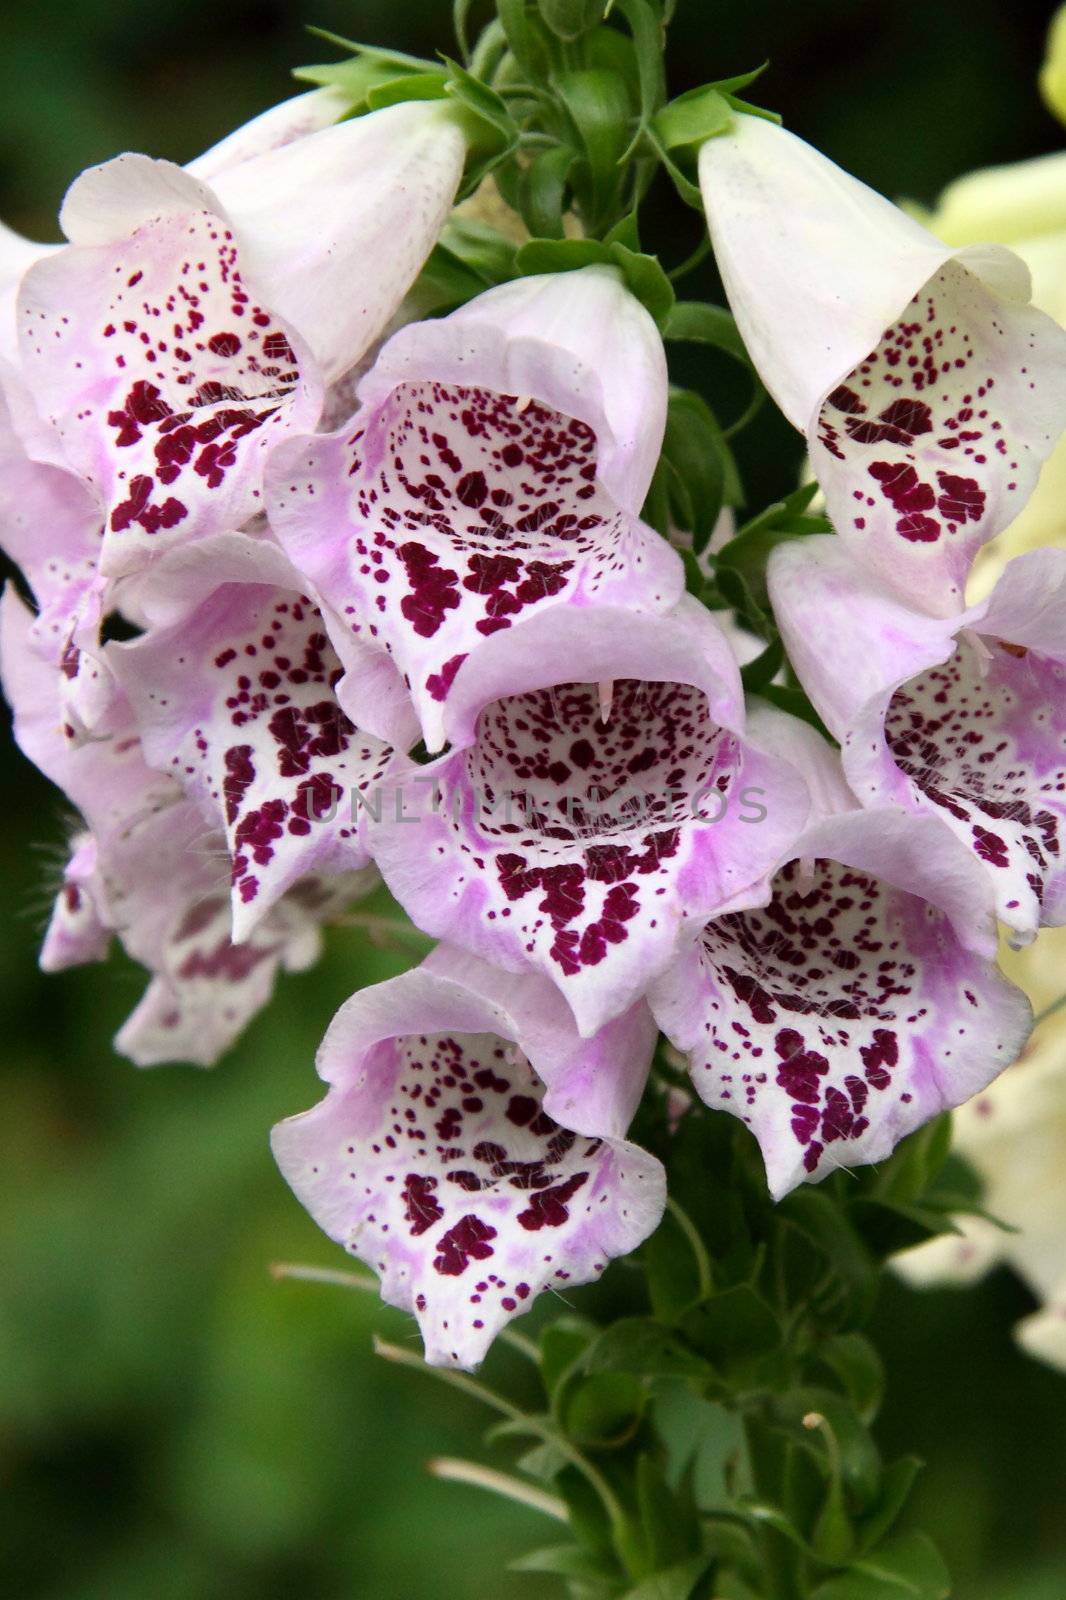 Each Foxglove ('digitalis') flower has a unique pattern within its tubular shape. Digitalis is used in the treatment of heart conditions.